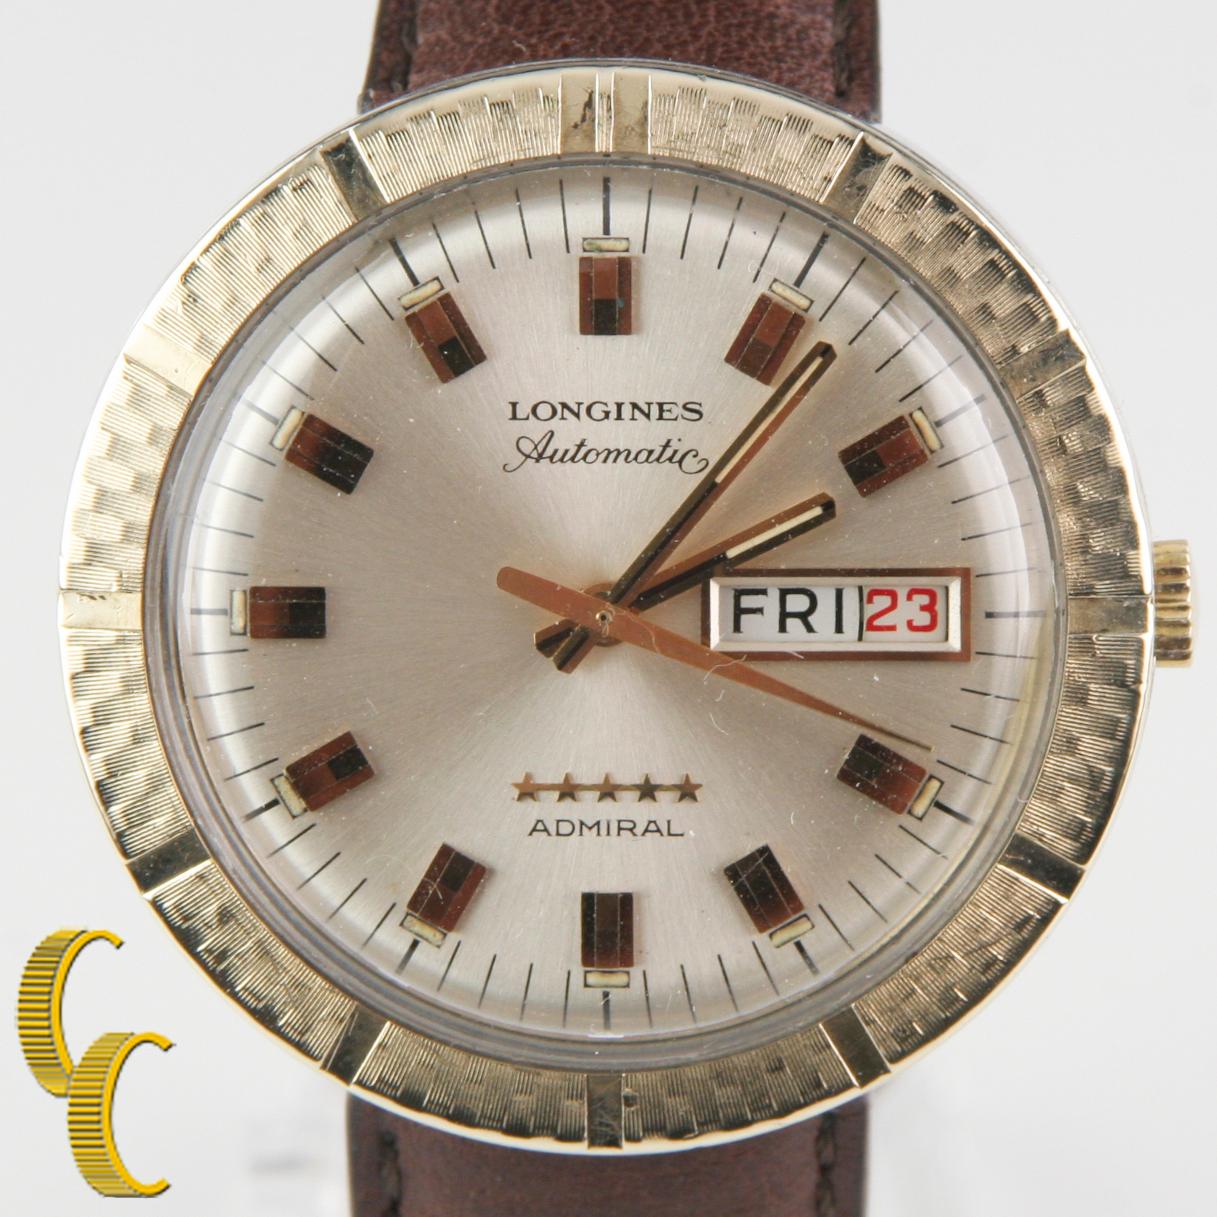 Longines Admiral 10k Gold Filled Automatic Day/Date Watch w/ Leather Band #508
Movement #508
Movement Serial #50770781
Case #2949
Case Serial #5077023769

10k Gold Filled Case w/ Stainless Steel Back
37 mm in Diameter (39 mm w/ Crown)
Lug-to-Lug